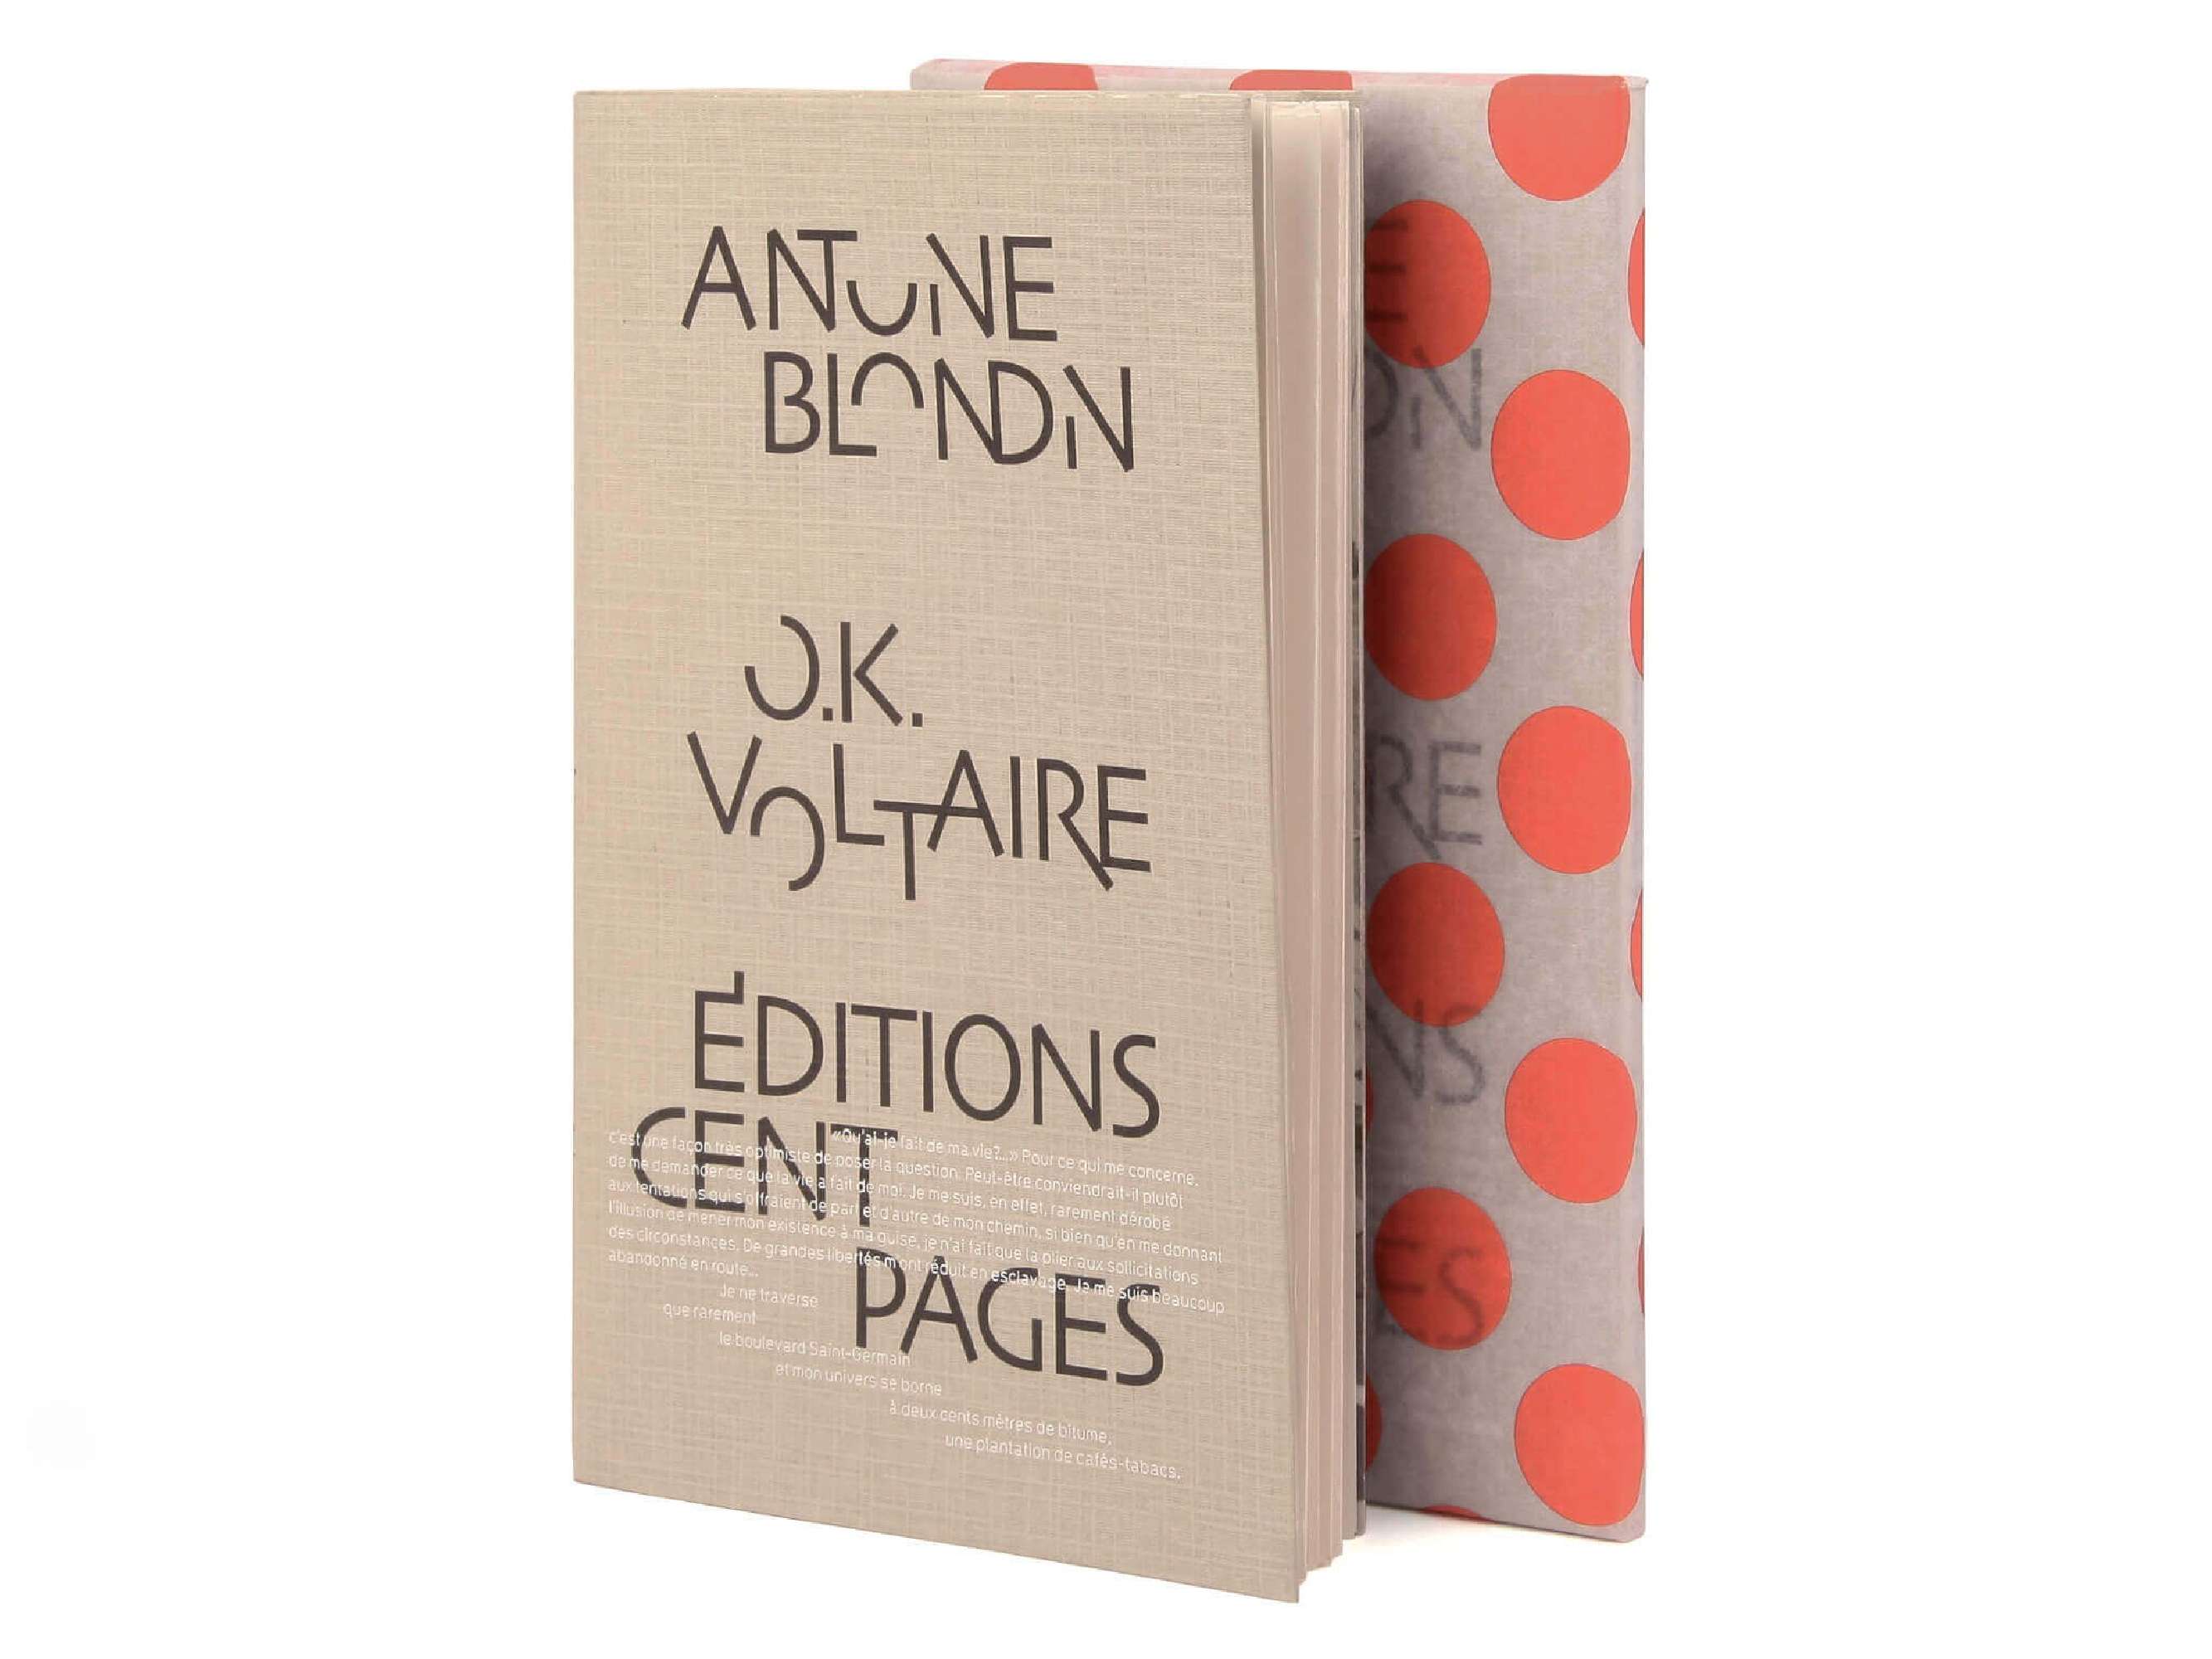 Antoine Blondin O.K. Voltaire Éditions cent pages collection Rouge-Gorge